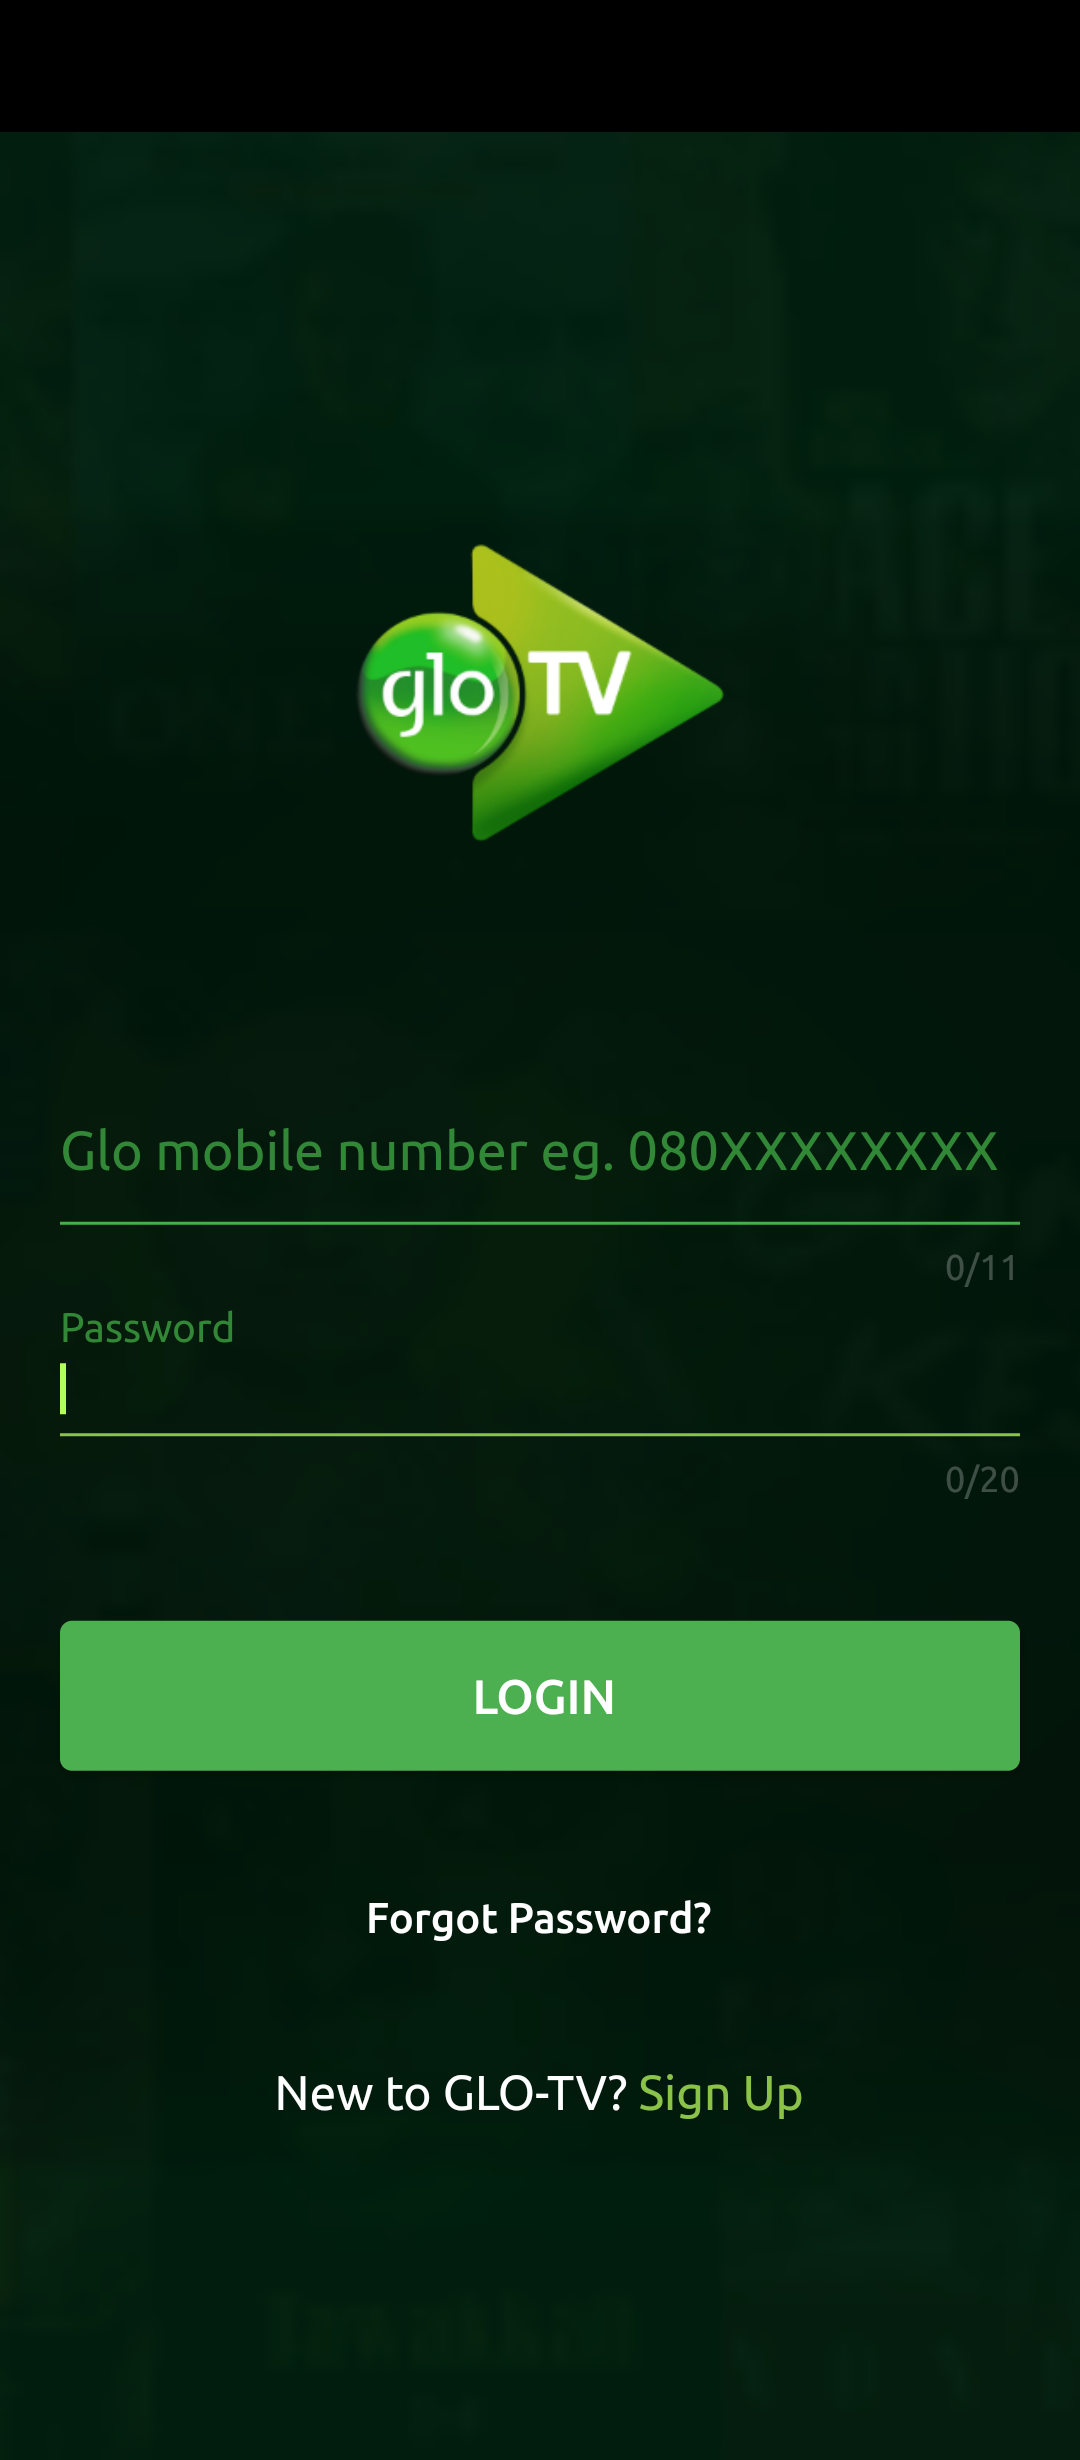 Glo TV APP Sign in - How to Login to Glo TV App